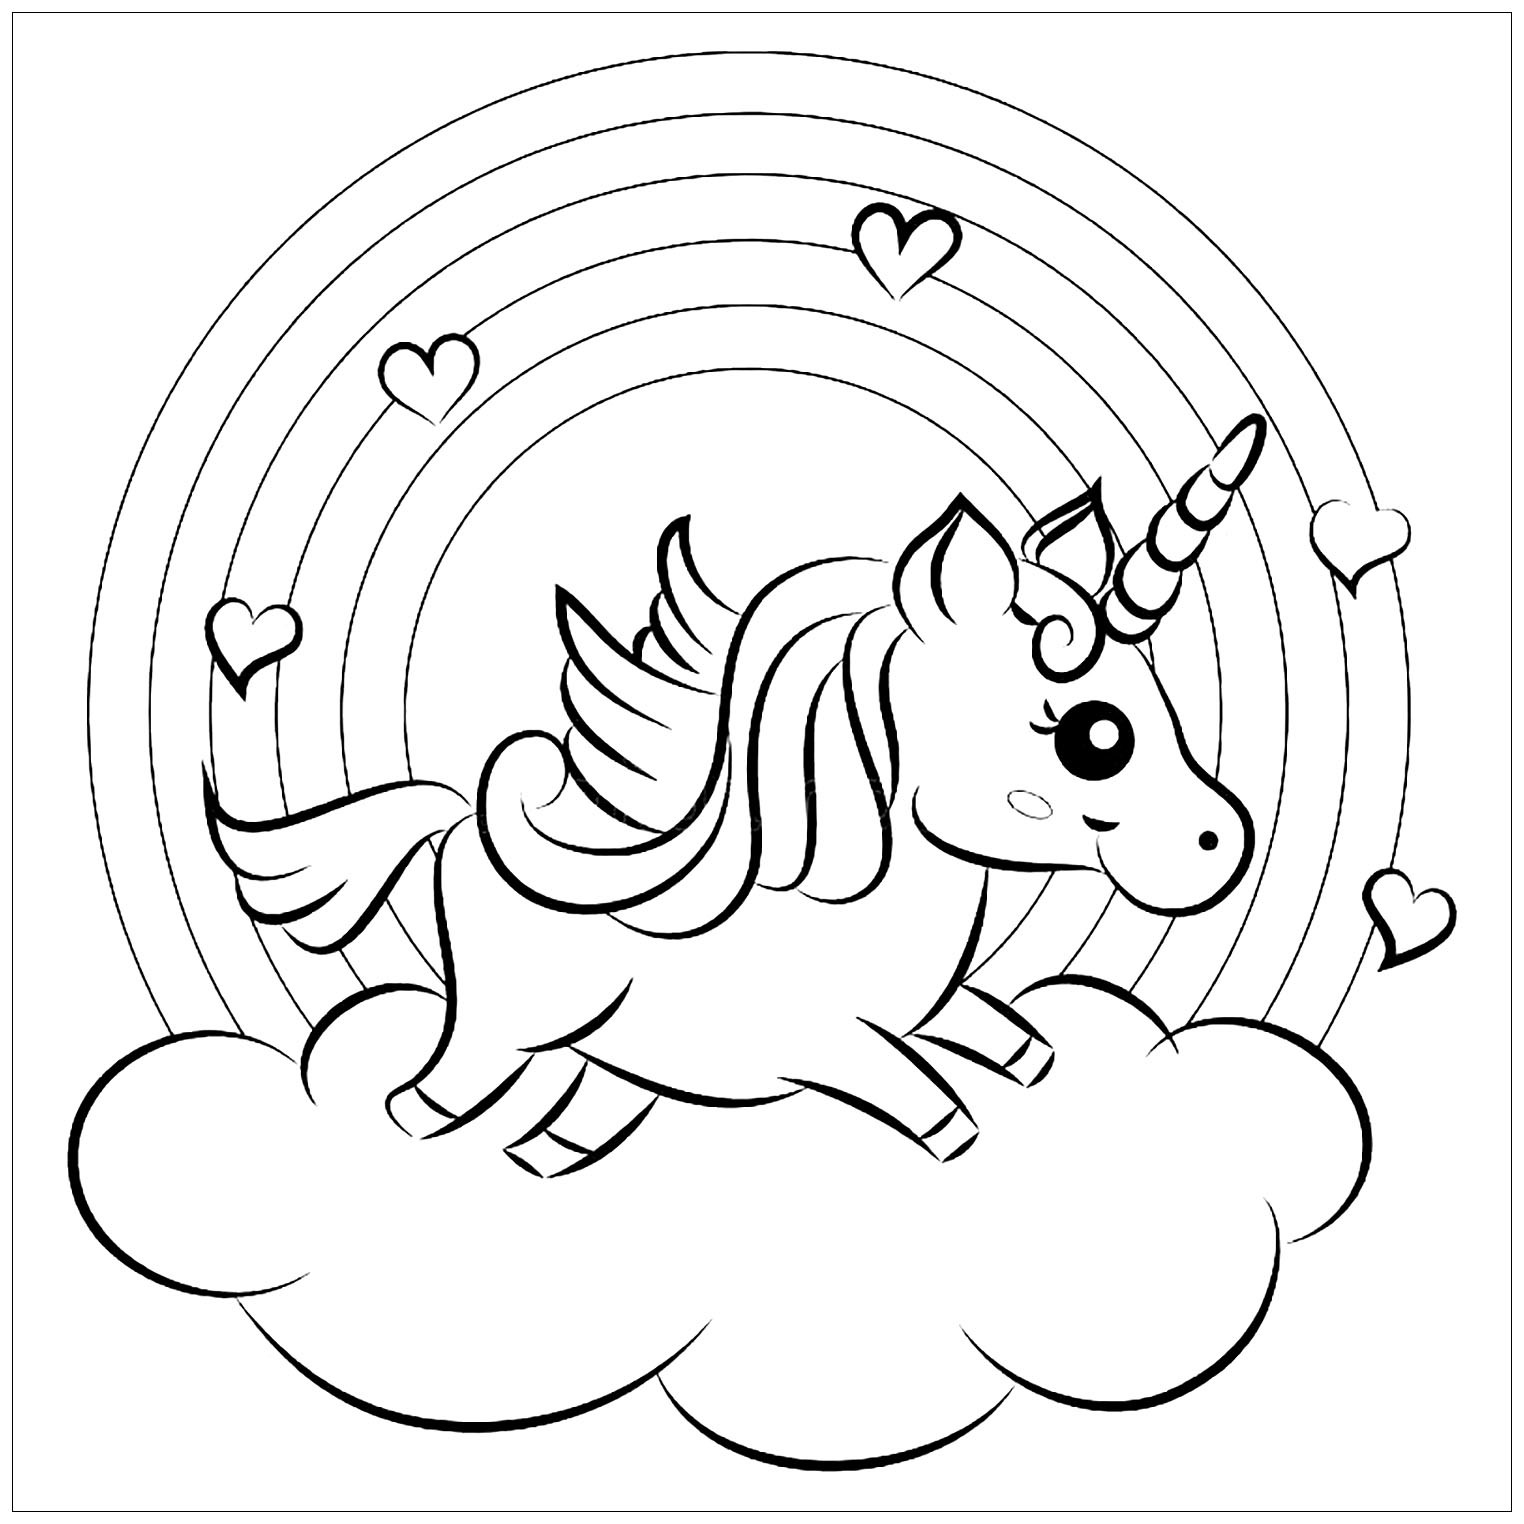 Coloring Pages For Kids Unicorn
 Unicorns free to color for kids Unicorns Kids Coloring Pages